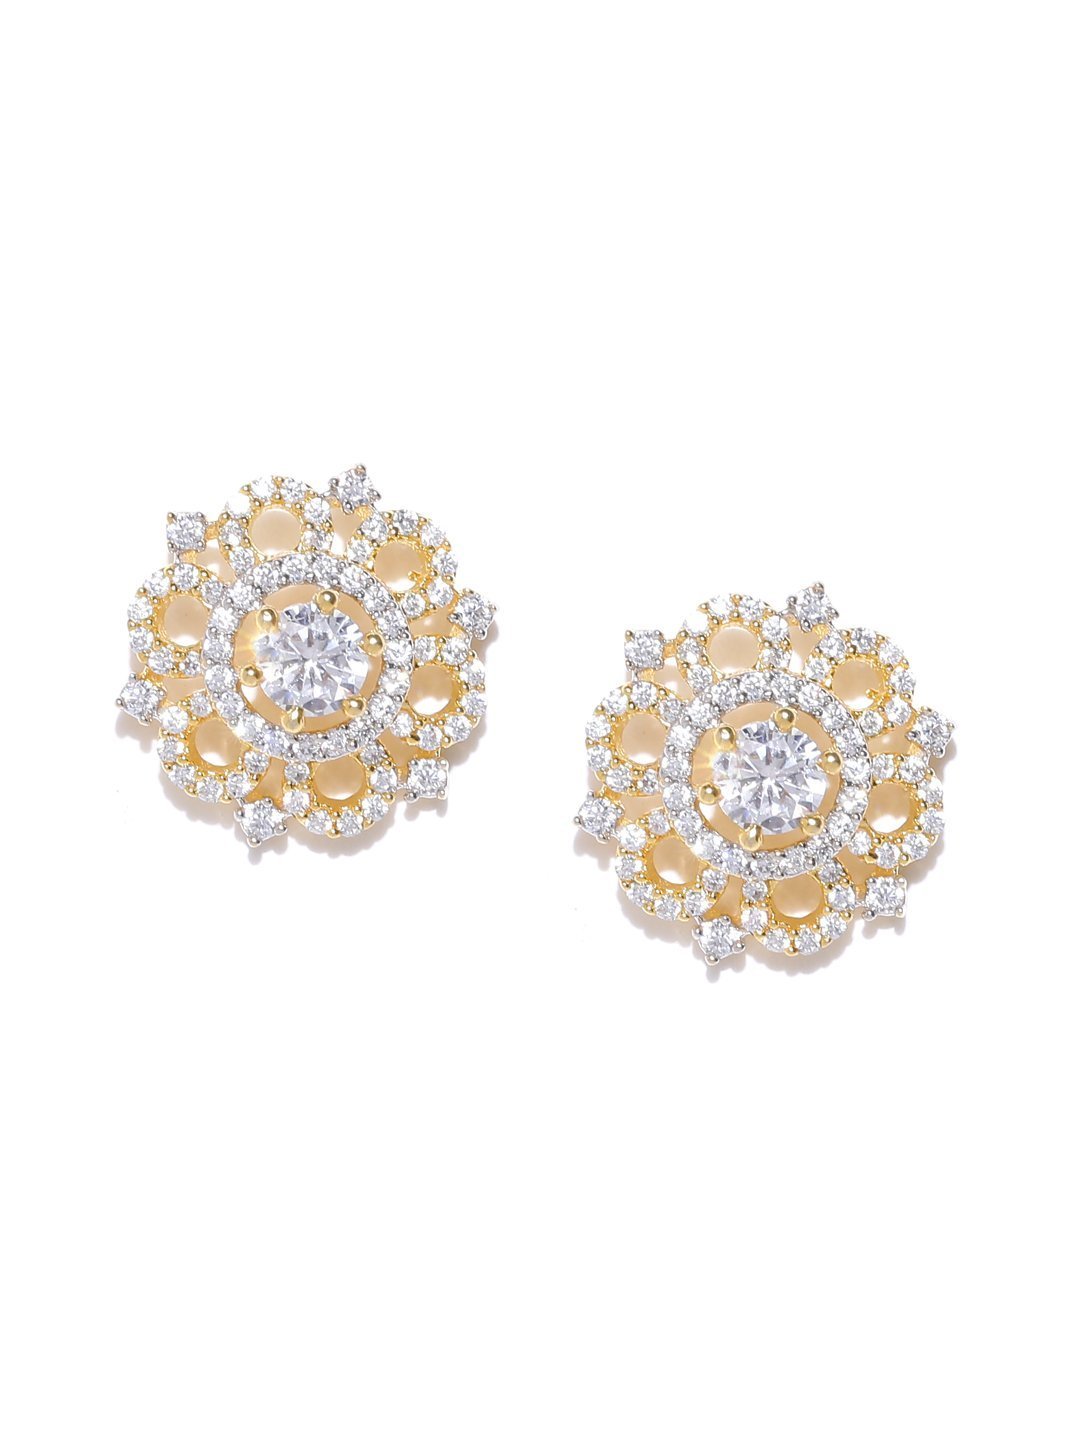 Buy Traditional Impon Stone Earring Gold Design South Indian Earrings